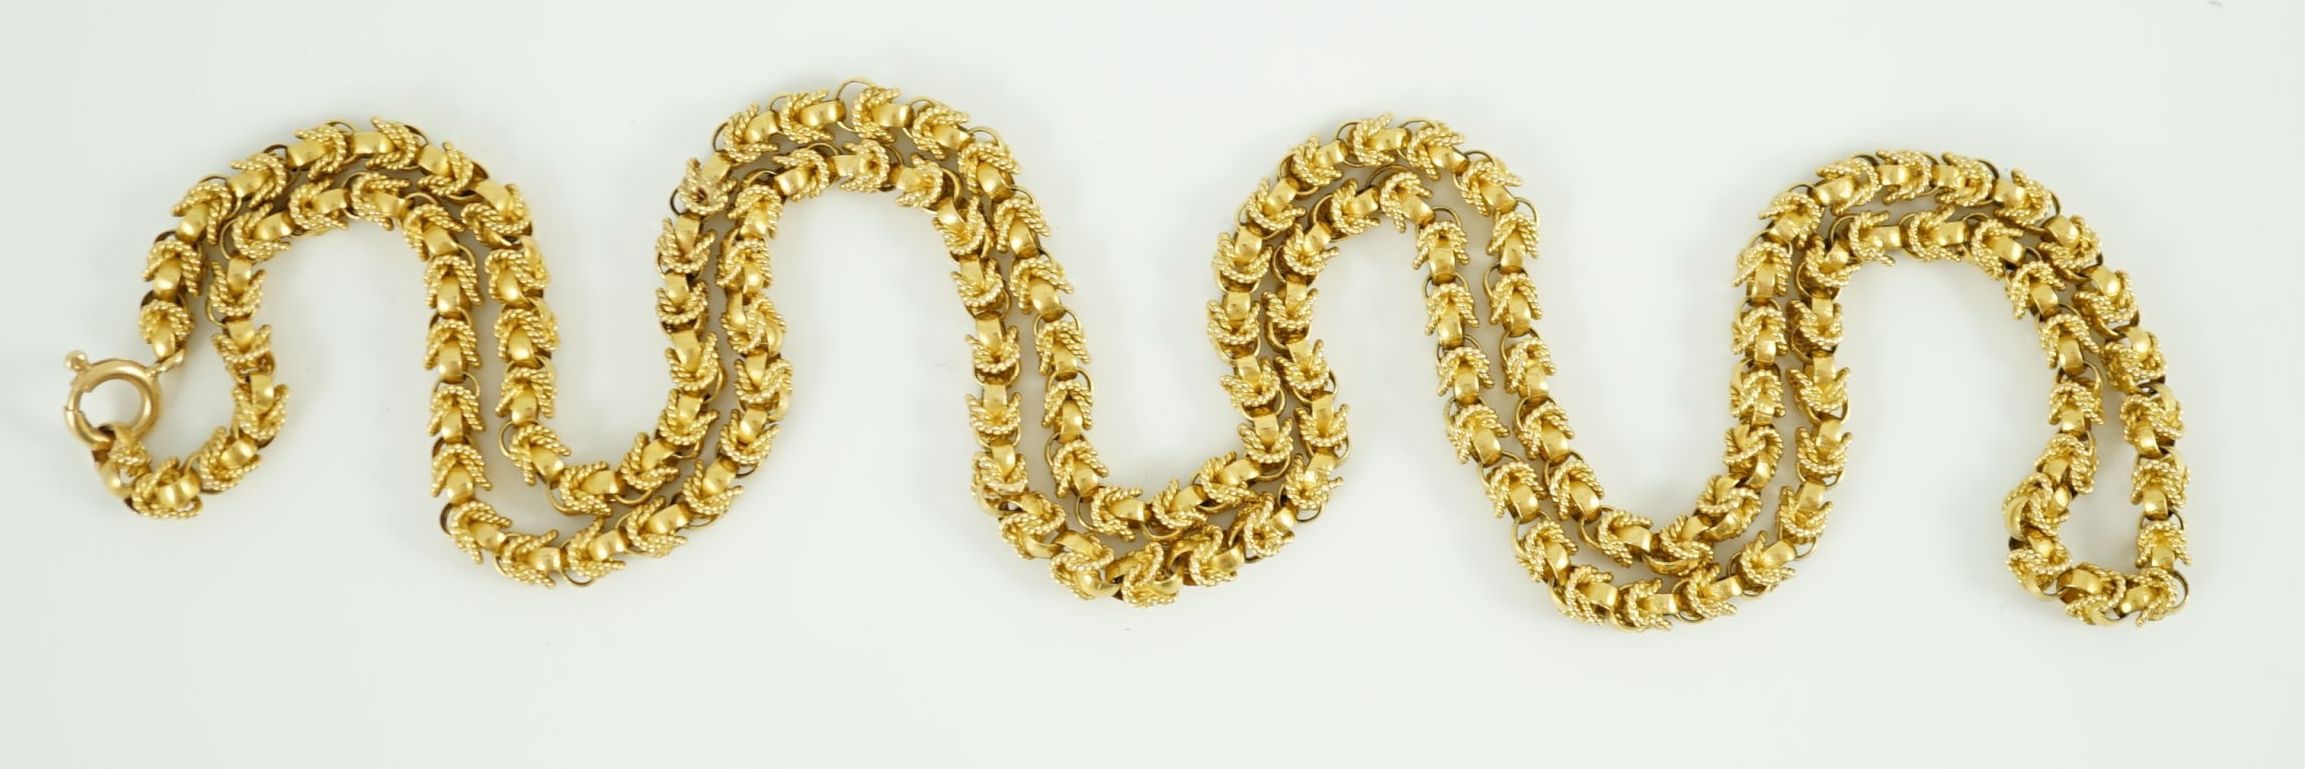 A 20th century 750 yellow gold fancy link necklace